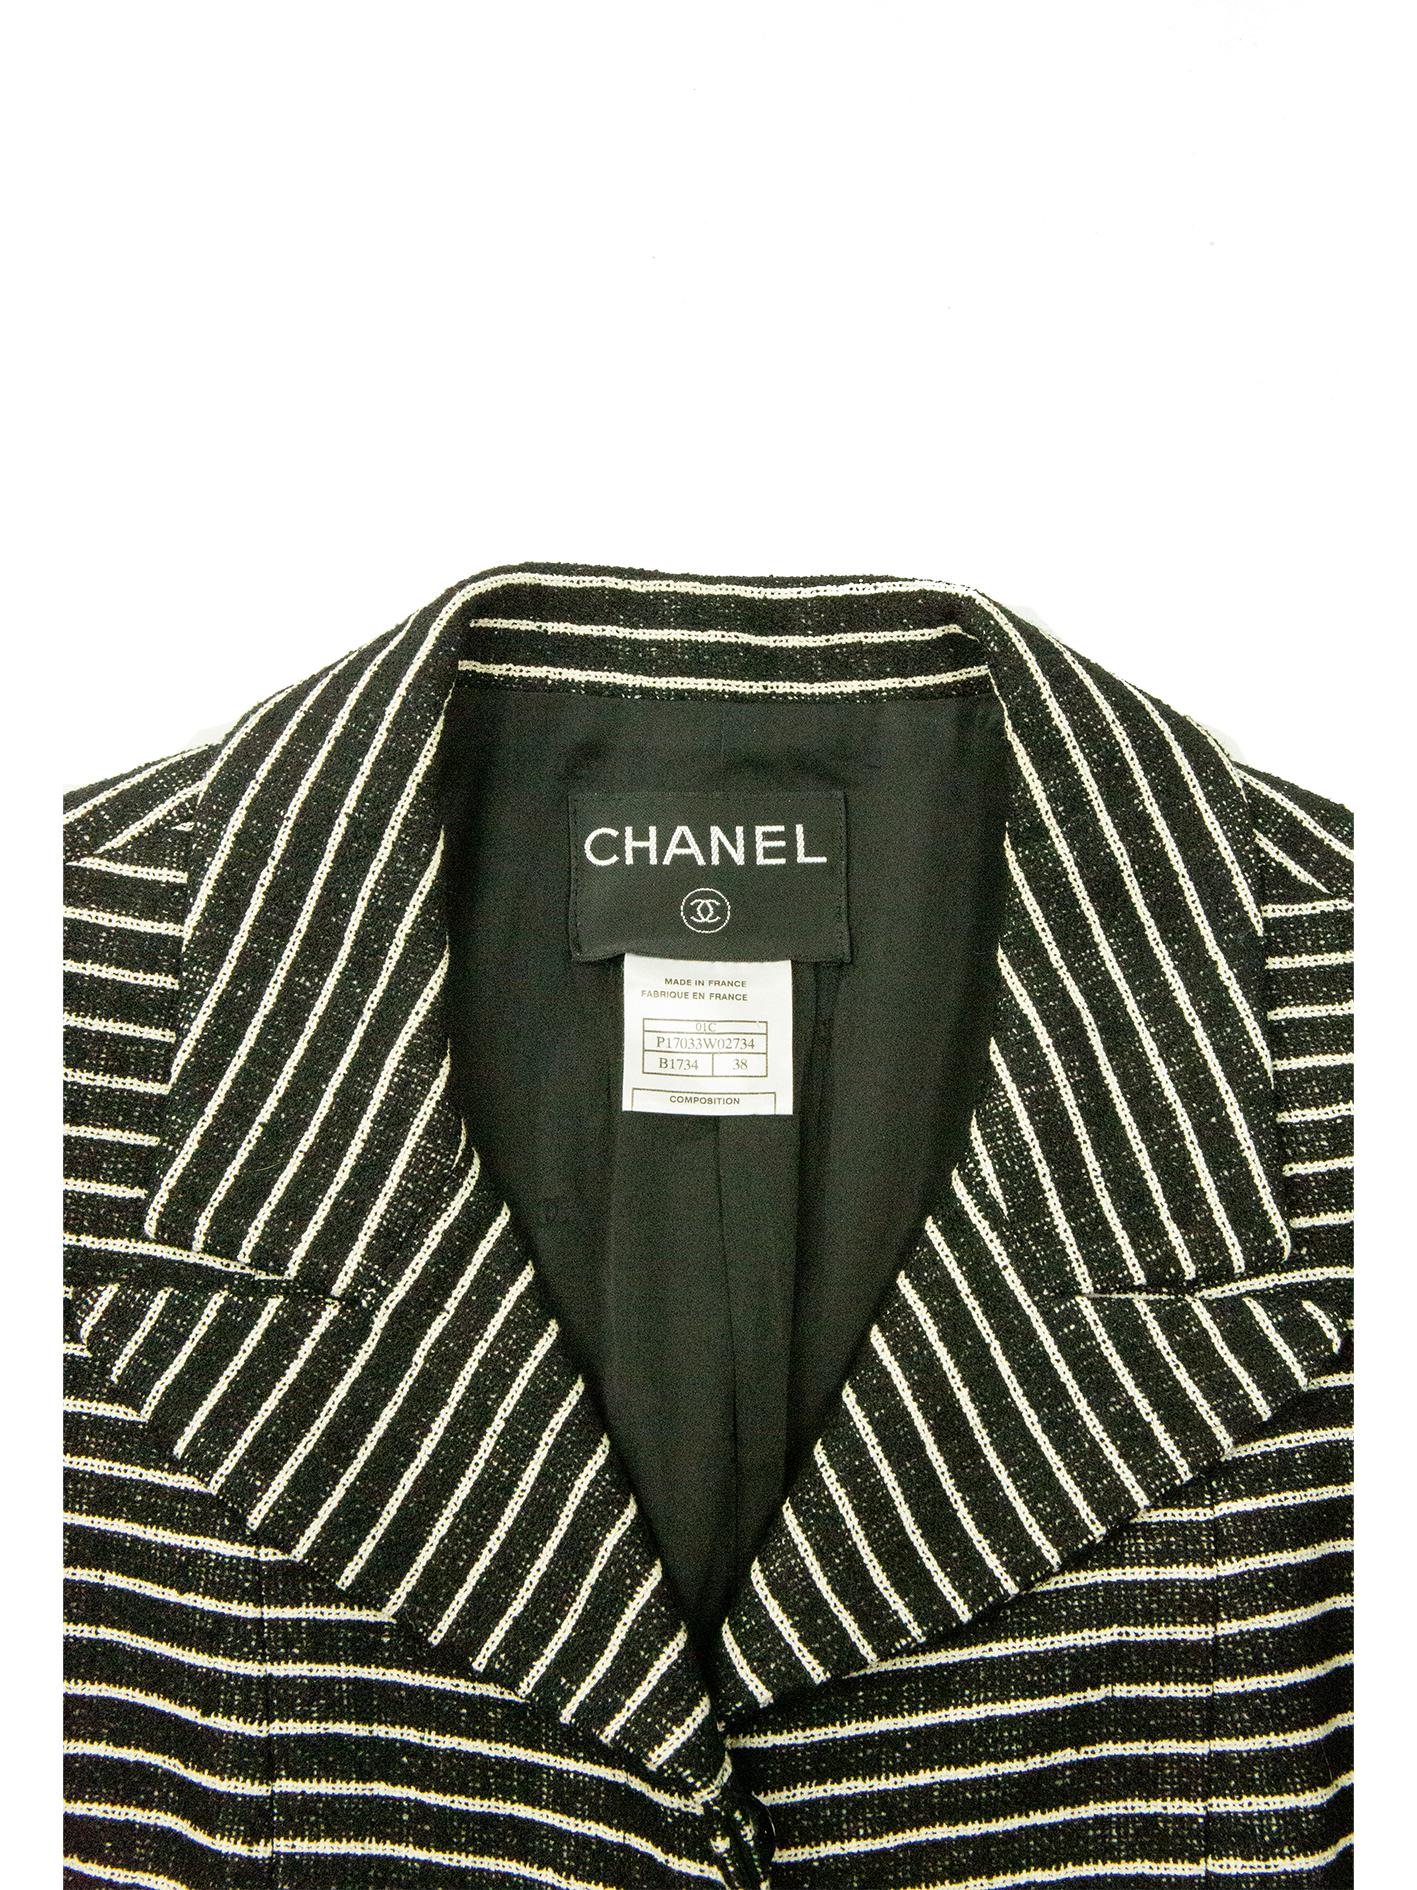 Chanel Cruise 2001 Striped Coat For Sale 2